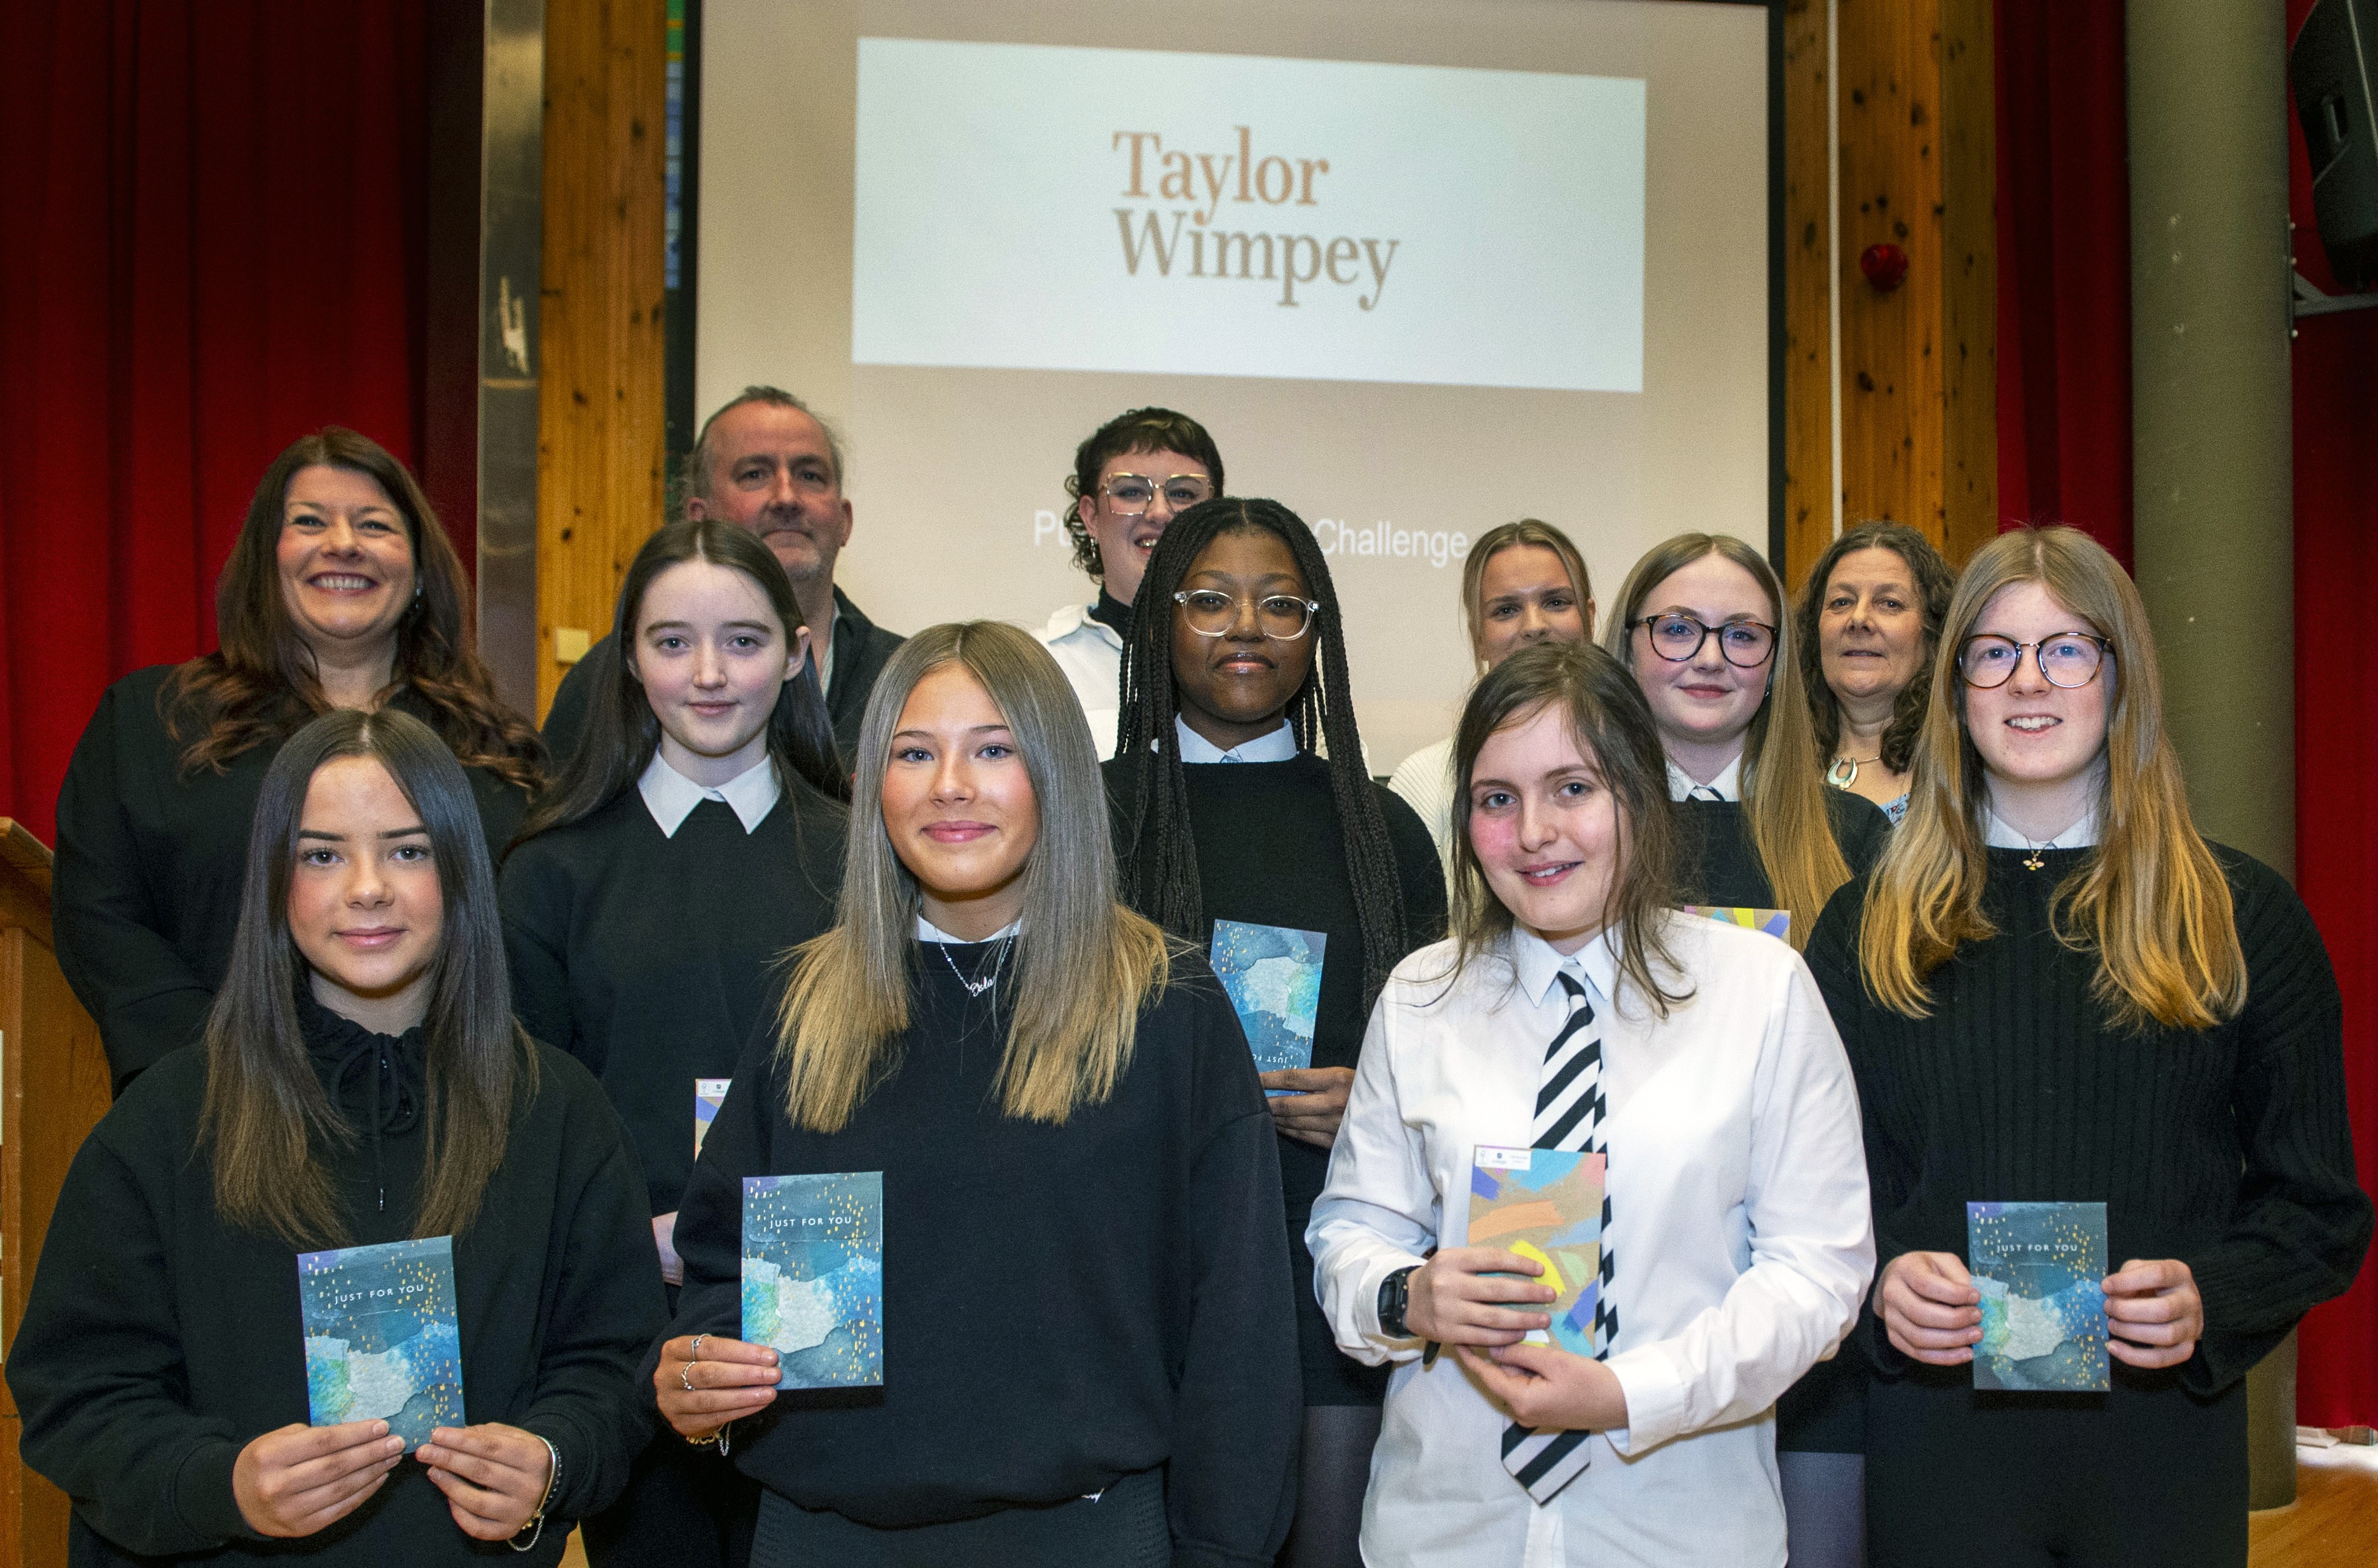 Winners of Taylor Wimpey's Spencer Fields community art project revealed